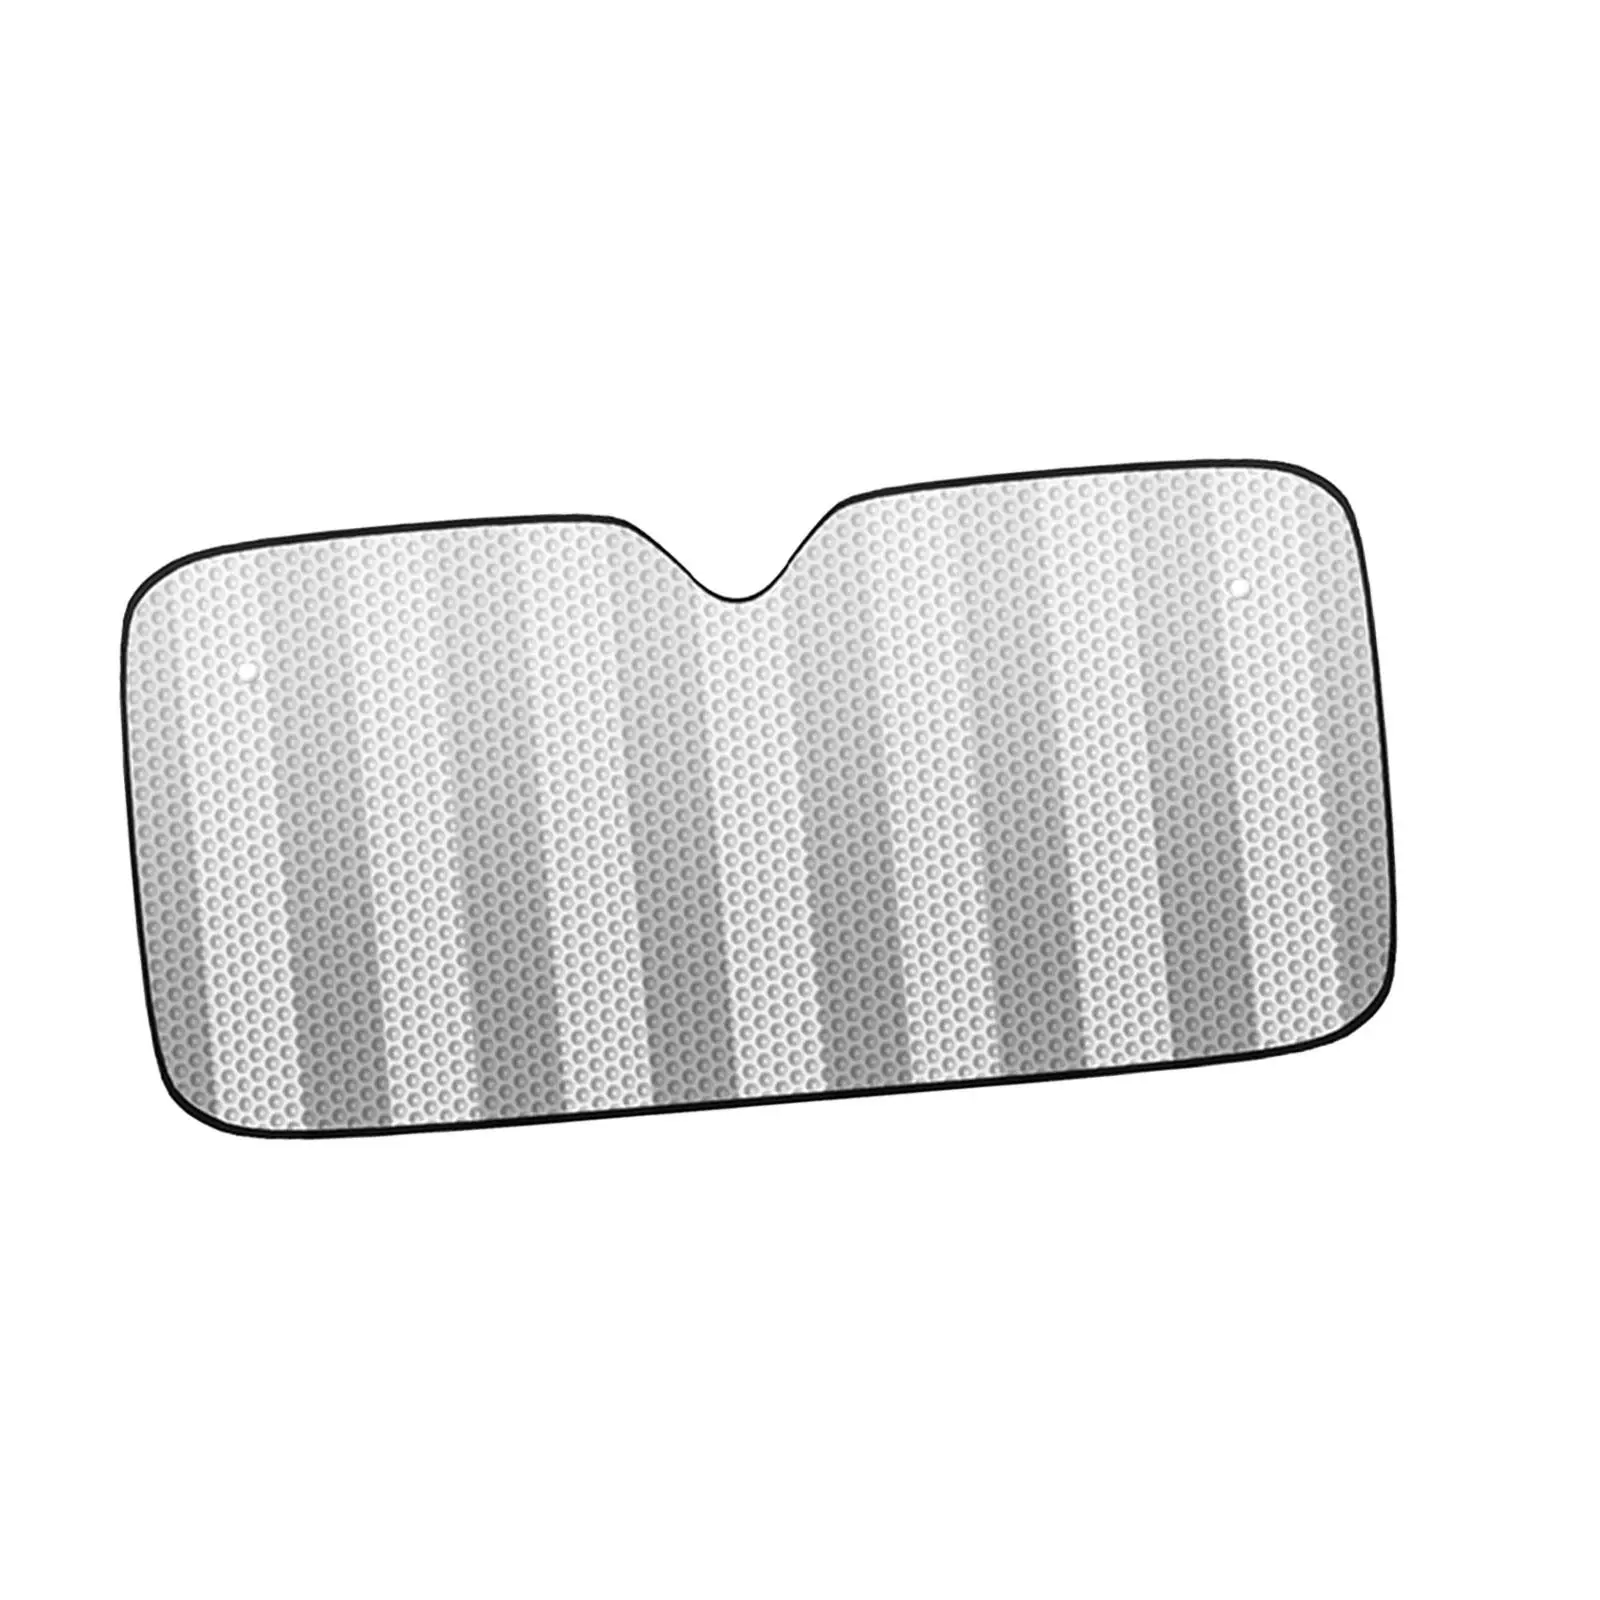 Car Window Shade Durable Visor for Most Vehicles SUV Compact Car